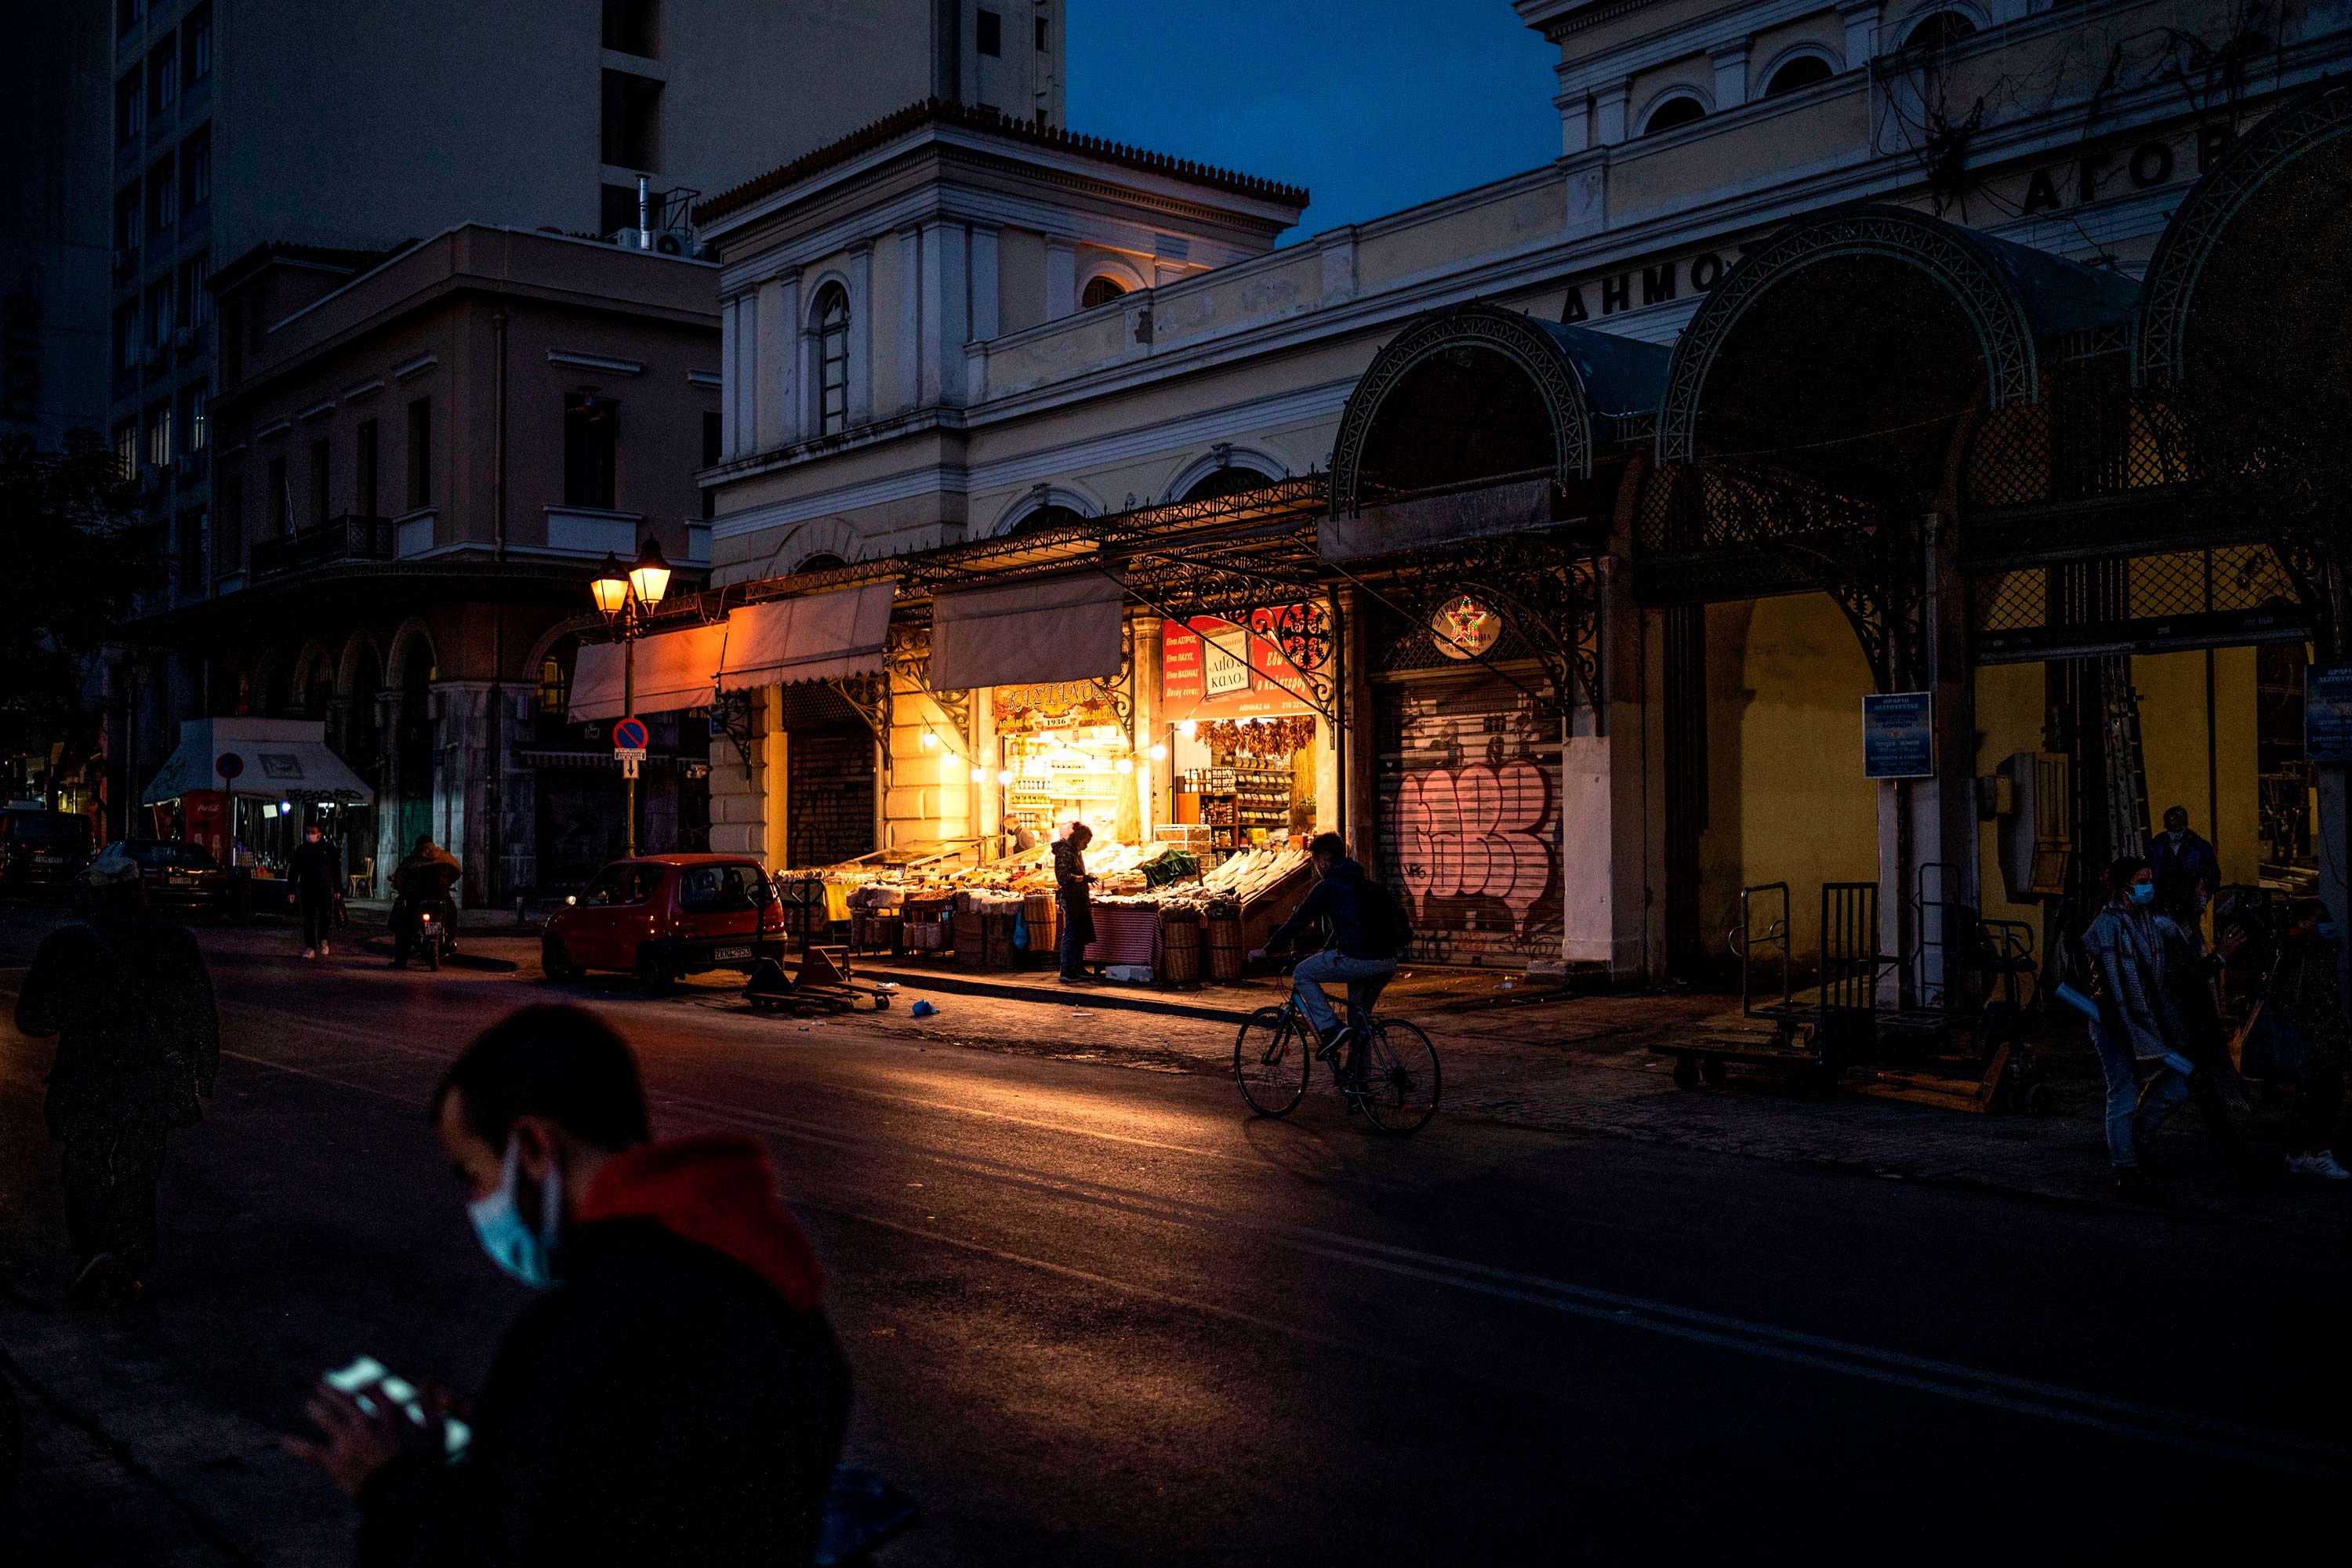 People make their way past a meat market in Athens, Greece, on February 2.